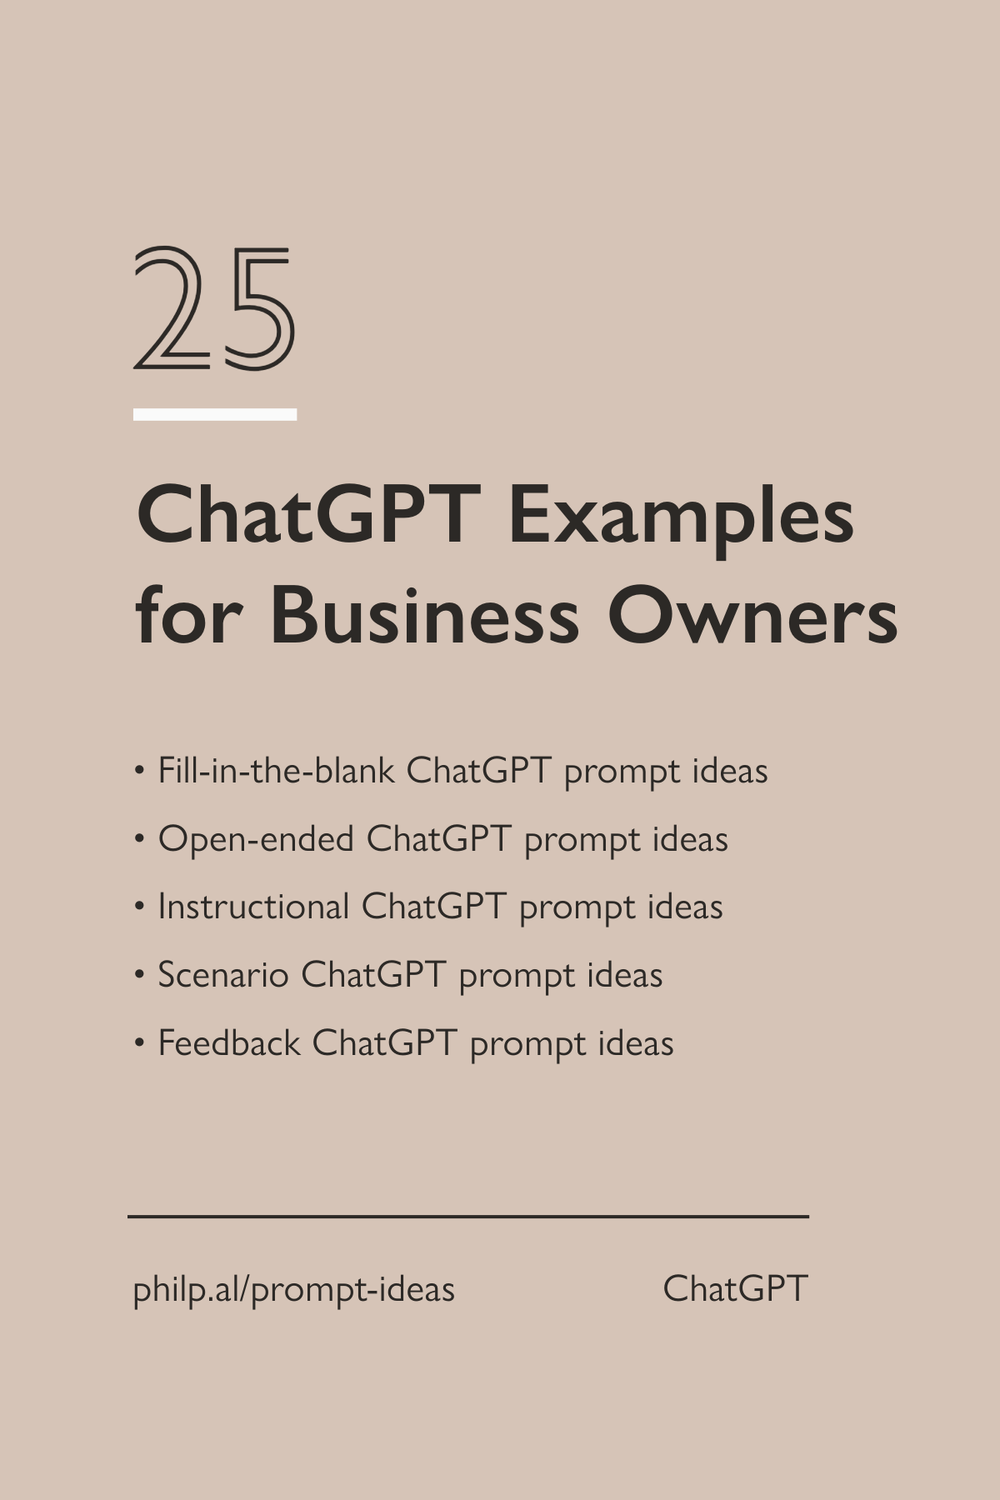 chatgpt-prompt-ideas-business-owners.png